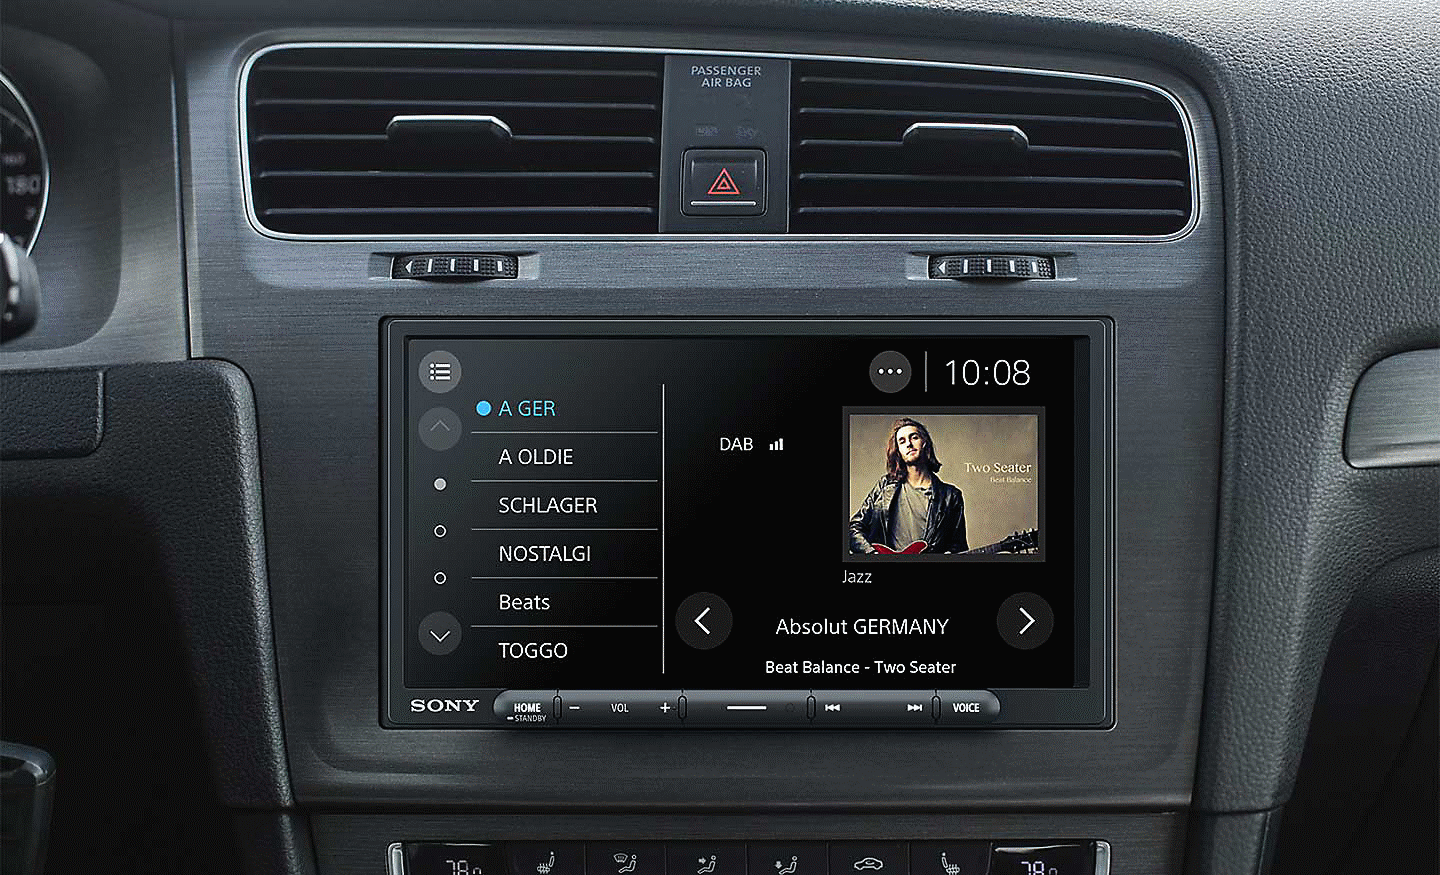 Image of the XAV-AX4050 in a dashboard with a DAB radio interface on-screen